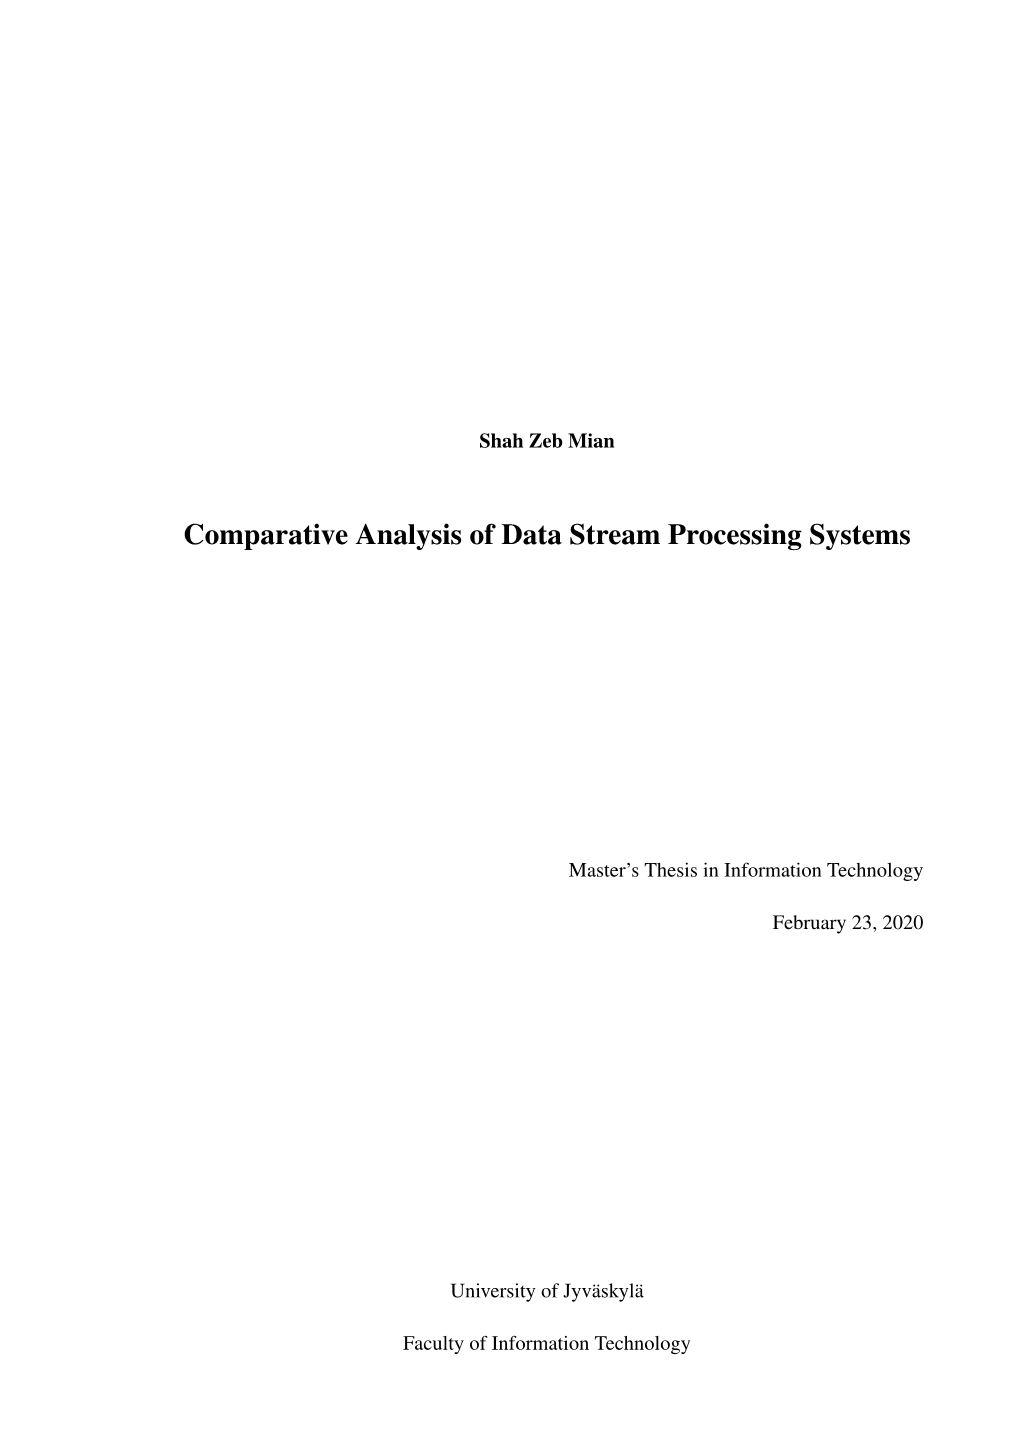 Comparative Analysis of Data Stream Processing Systems